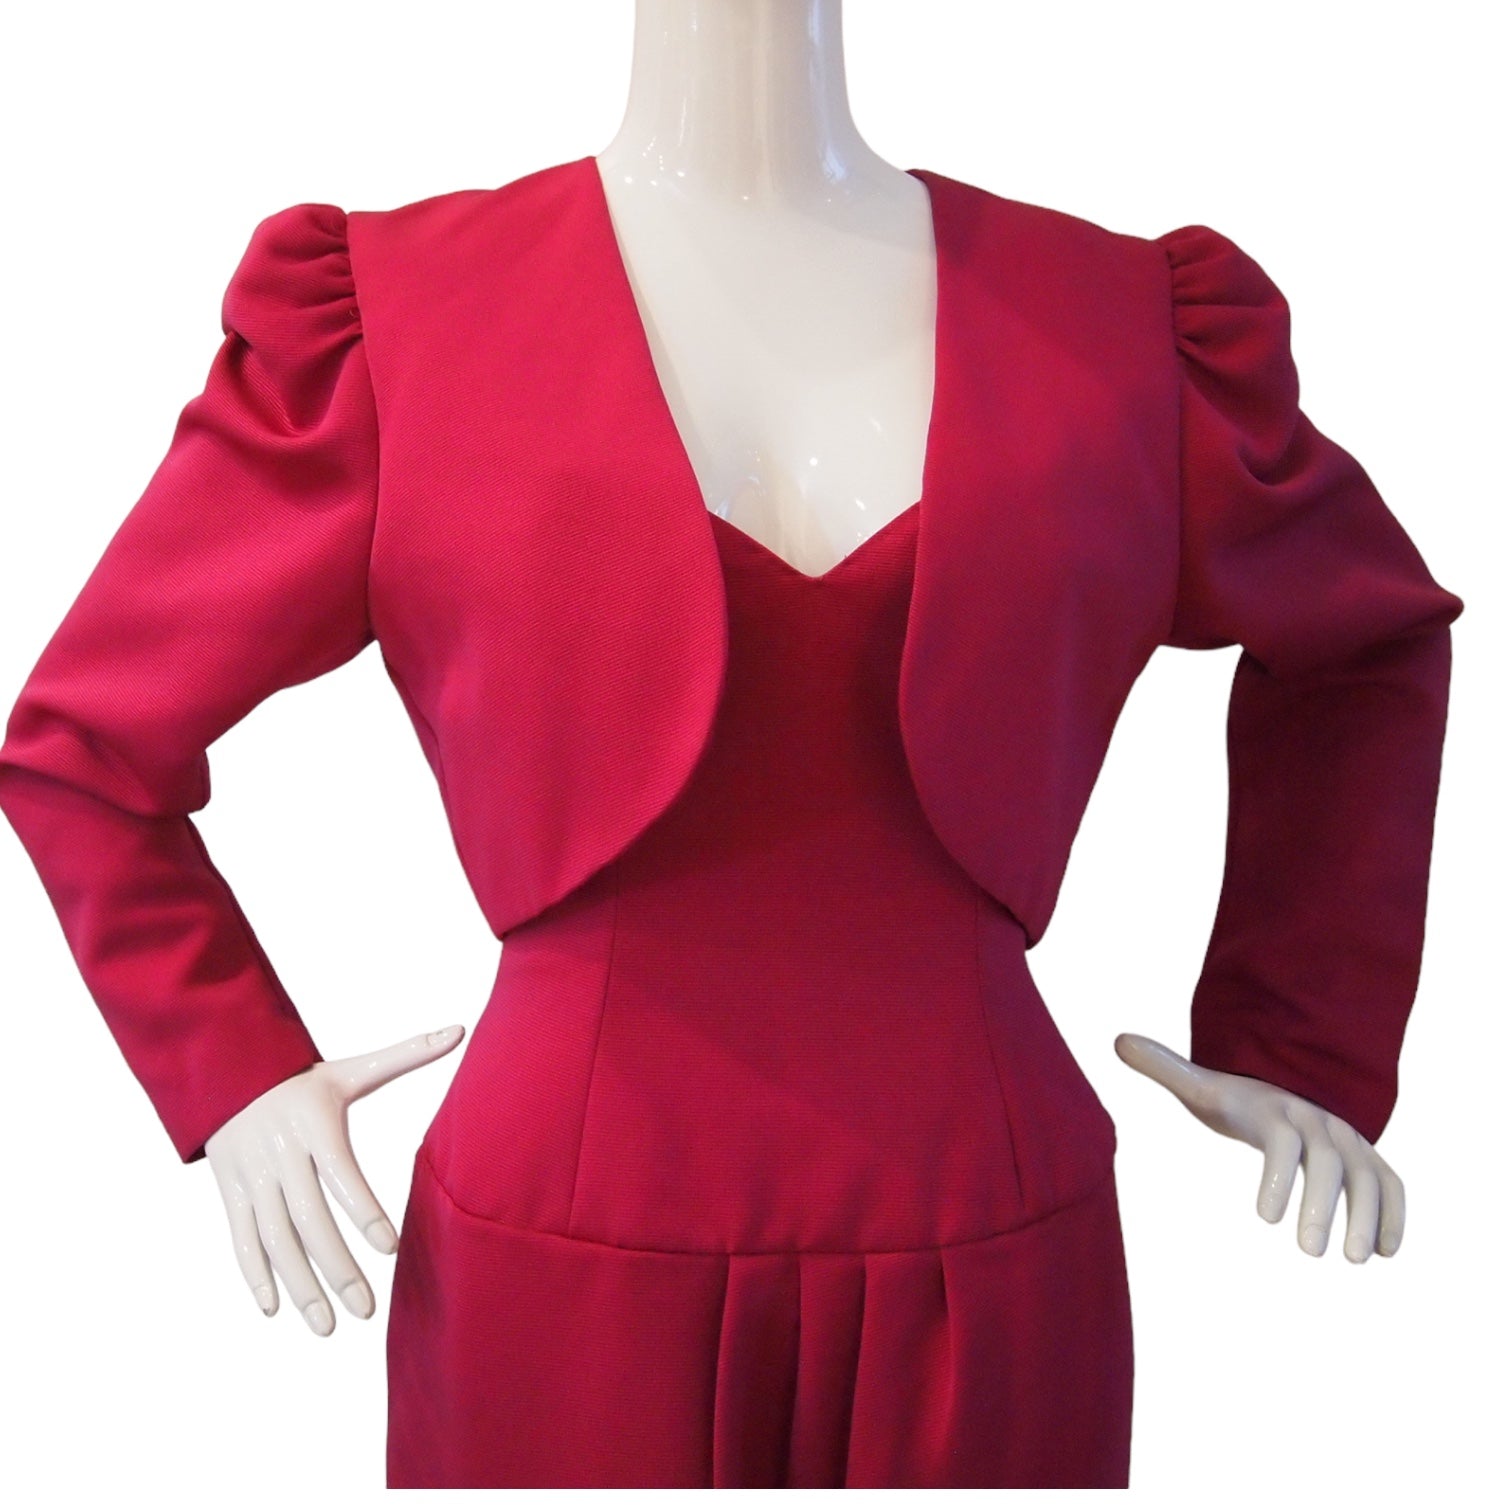 In The Moment Magenta Hot Pink Evening Dress with Long Sleeve Jacket